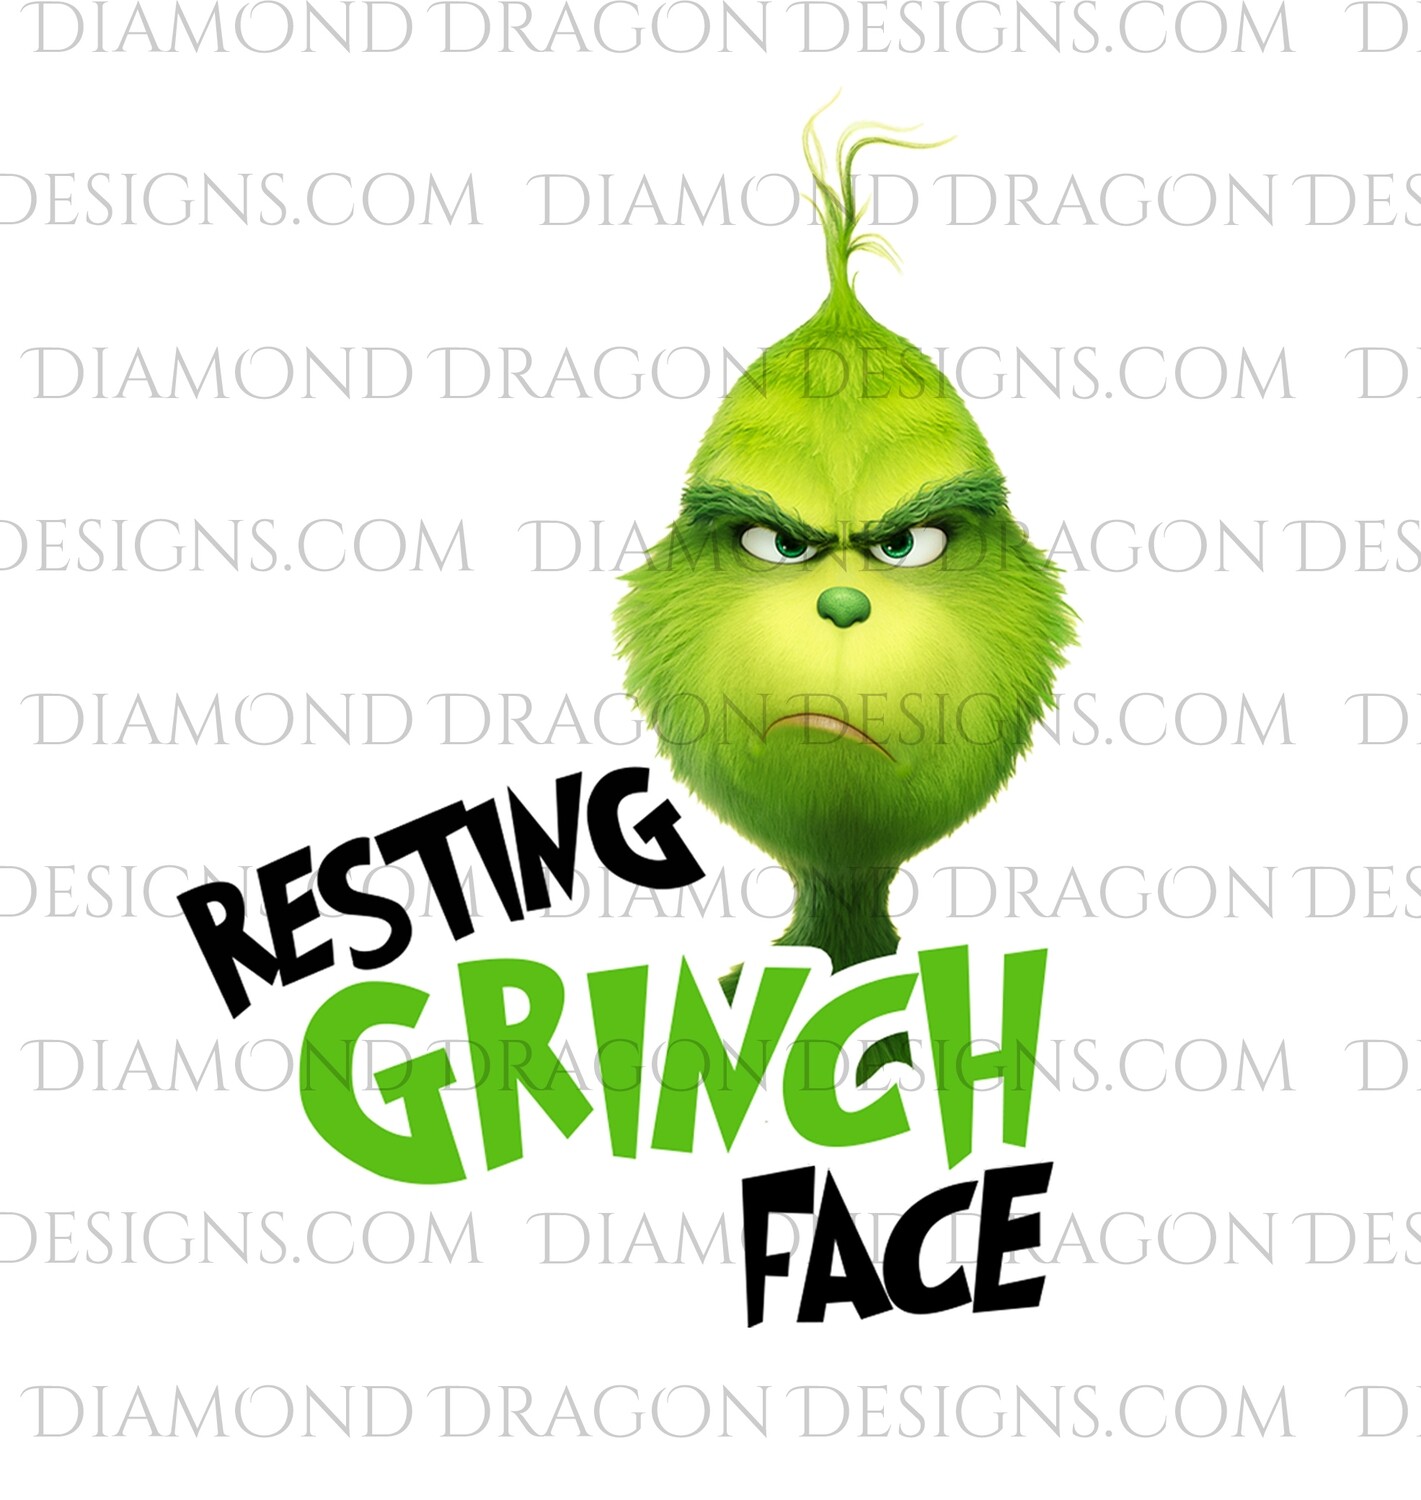 Christmas - Resting Grinch Face, Inspired, Digital Image